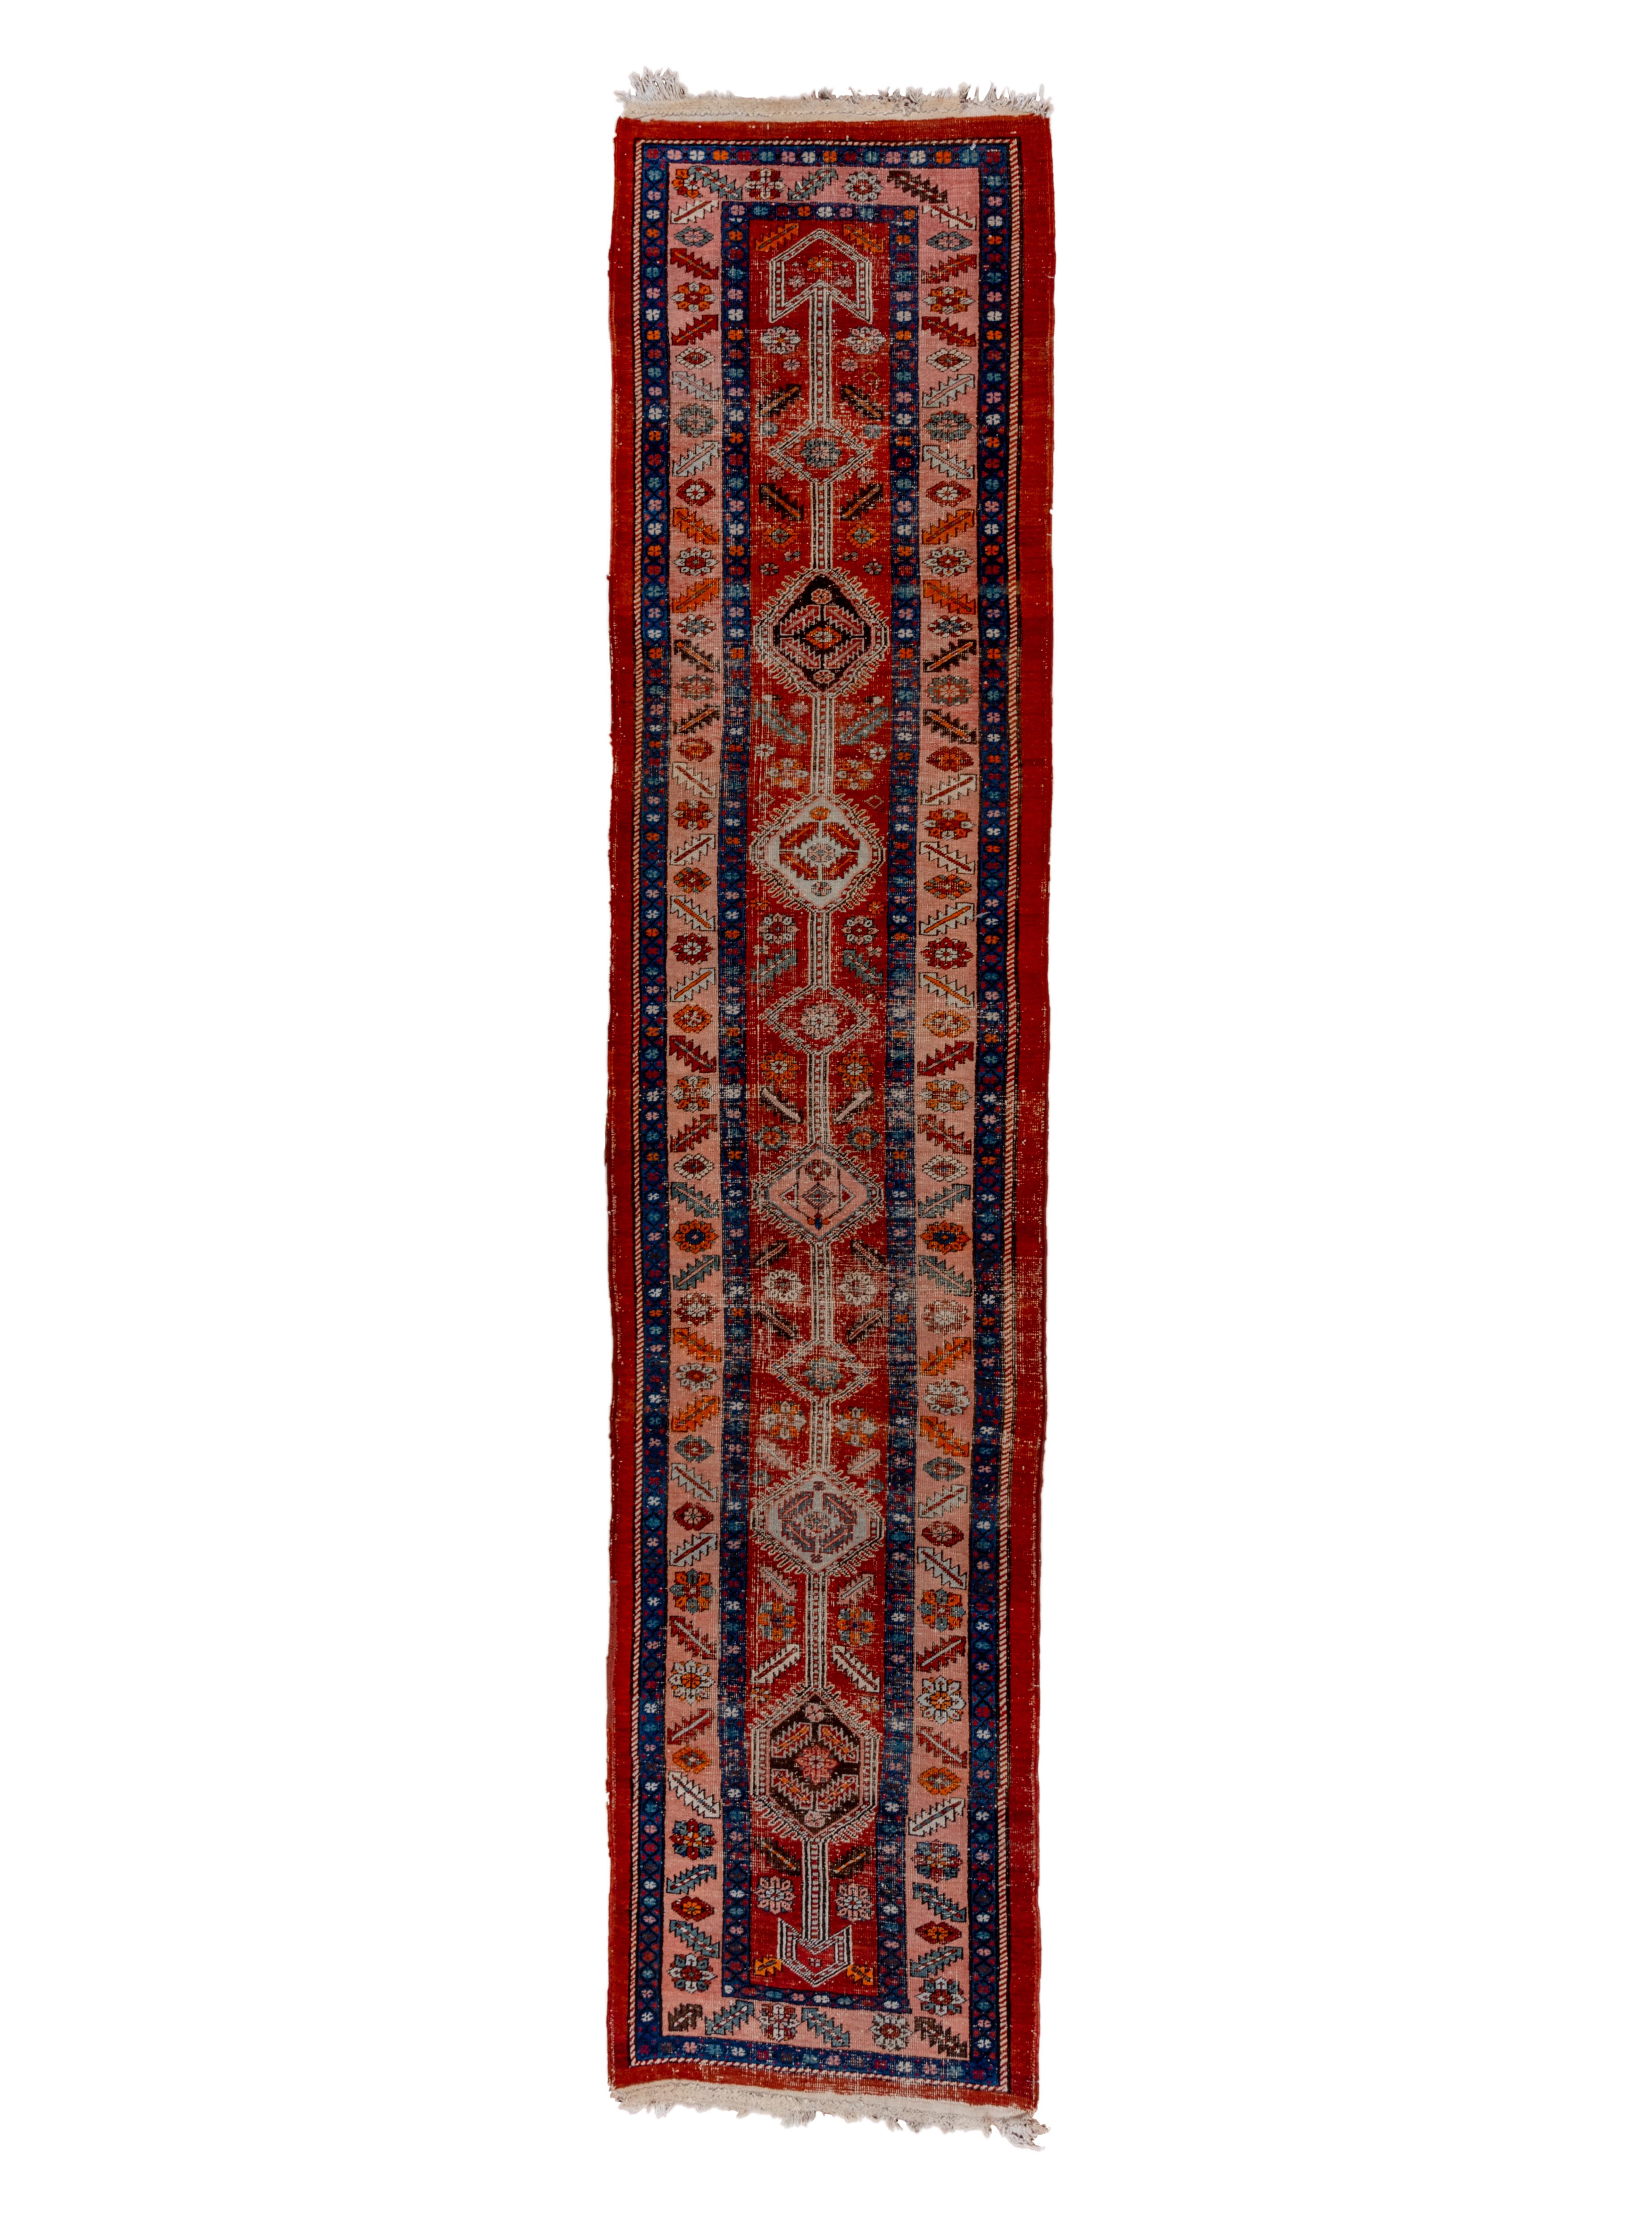 This rustic NW Persian runner from the famous Heriz district features quintapartite pole medallion of uniformly finger fringed hexagons in light blue and straw/camel, with en suite side and corner fillers, all on a narrow madder red ground. All